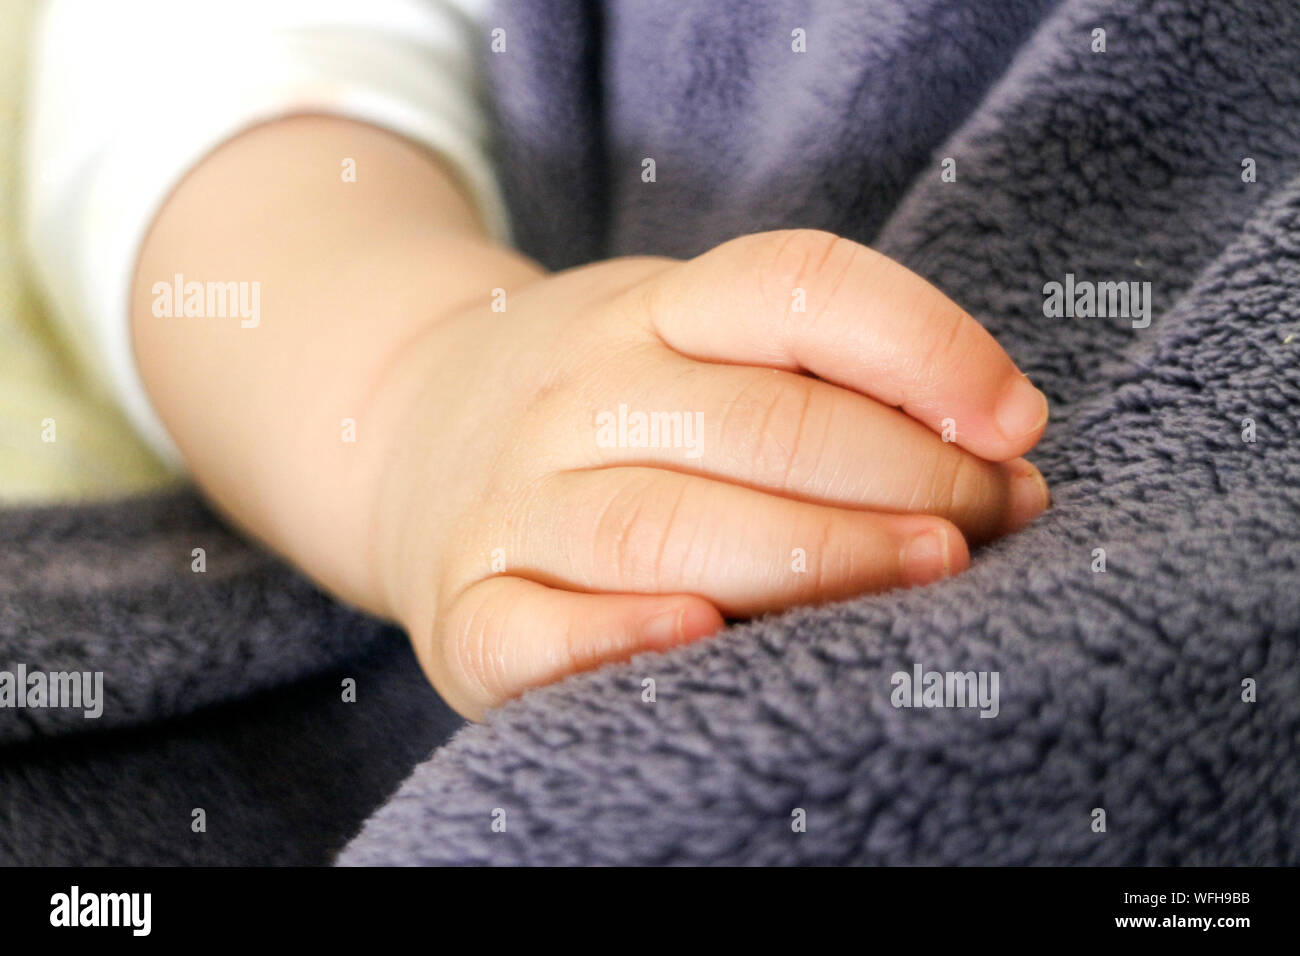 Cropped Hand Of Baby On Towel Stock Photo